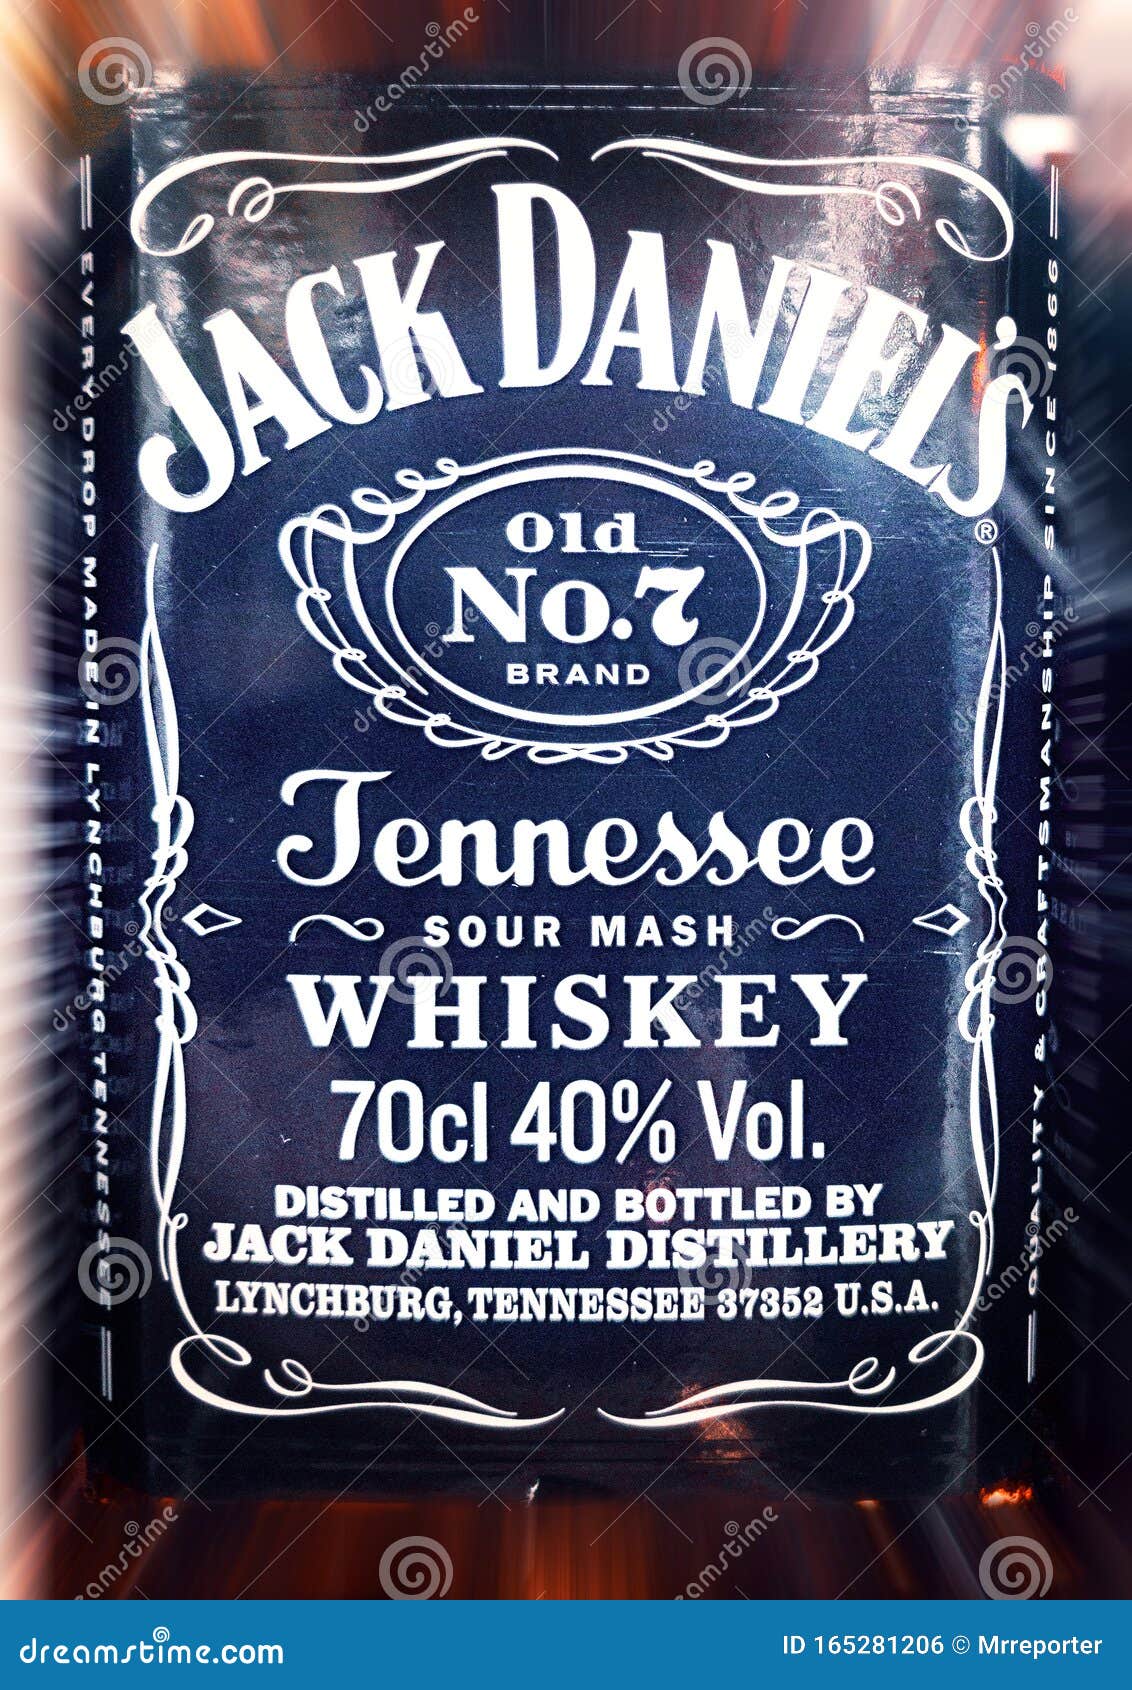 23cl Photos - Free & Royalty-Free Stock Photos from Dreamstime Within Blank Jack Daniels Label Template